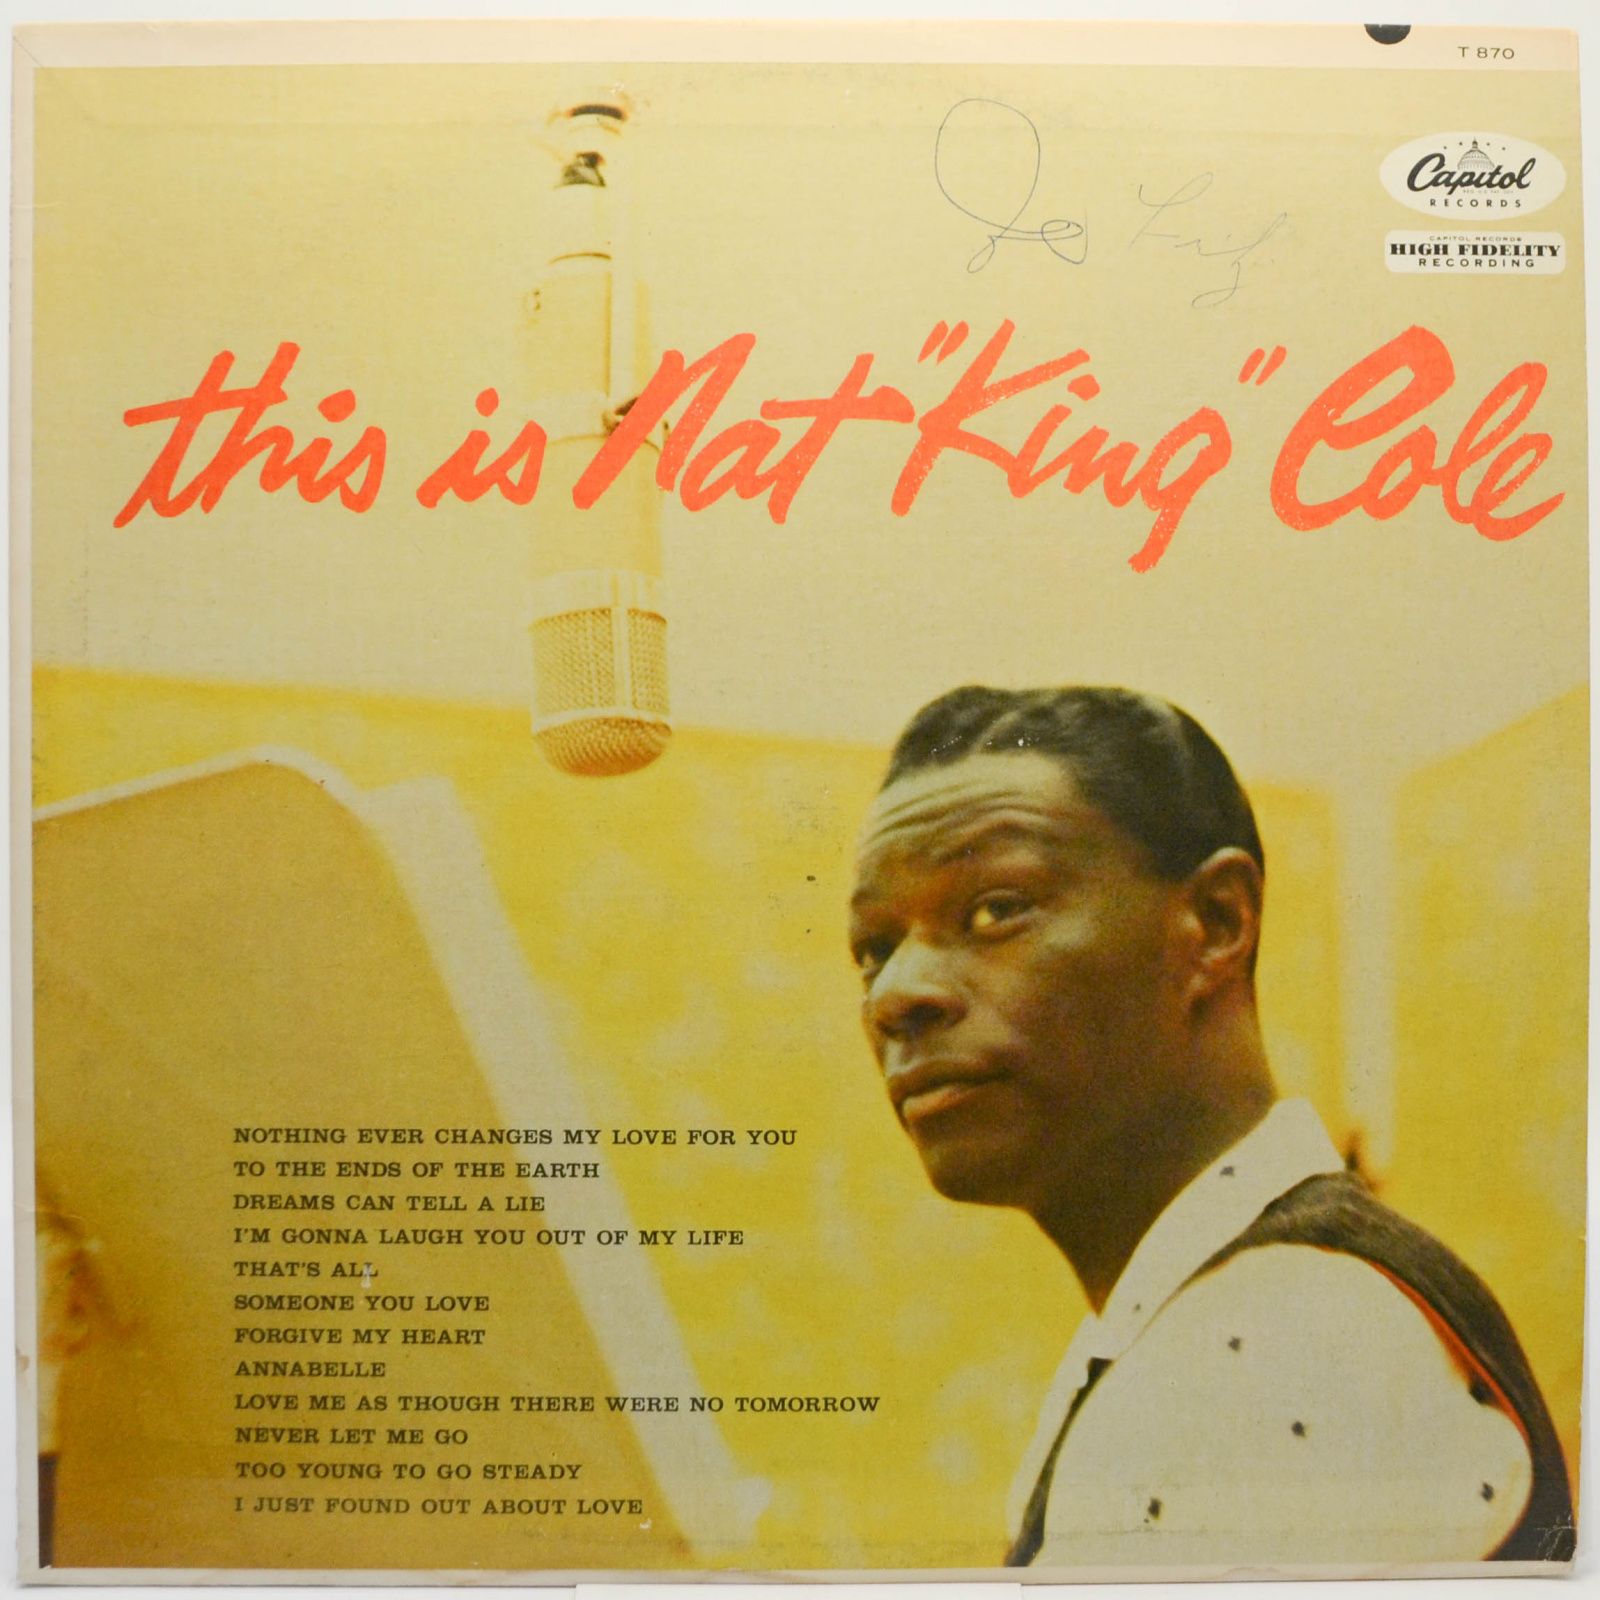 Nat King Cole — This Is Nat "King" Cole (USA), 1957